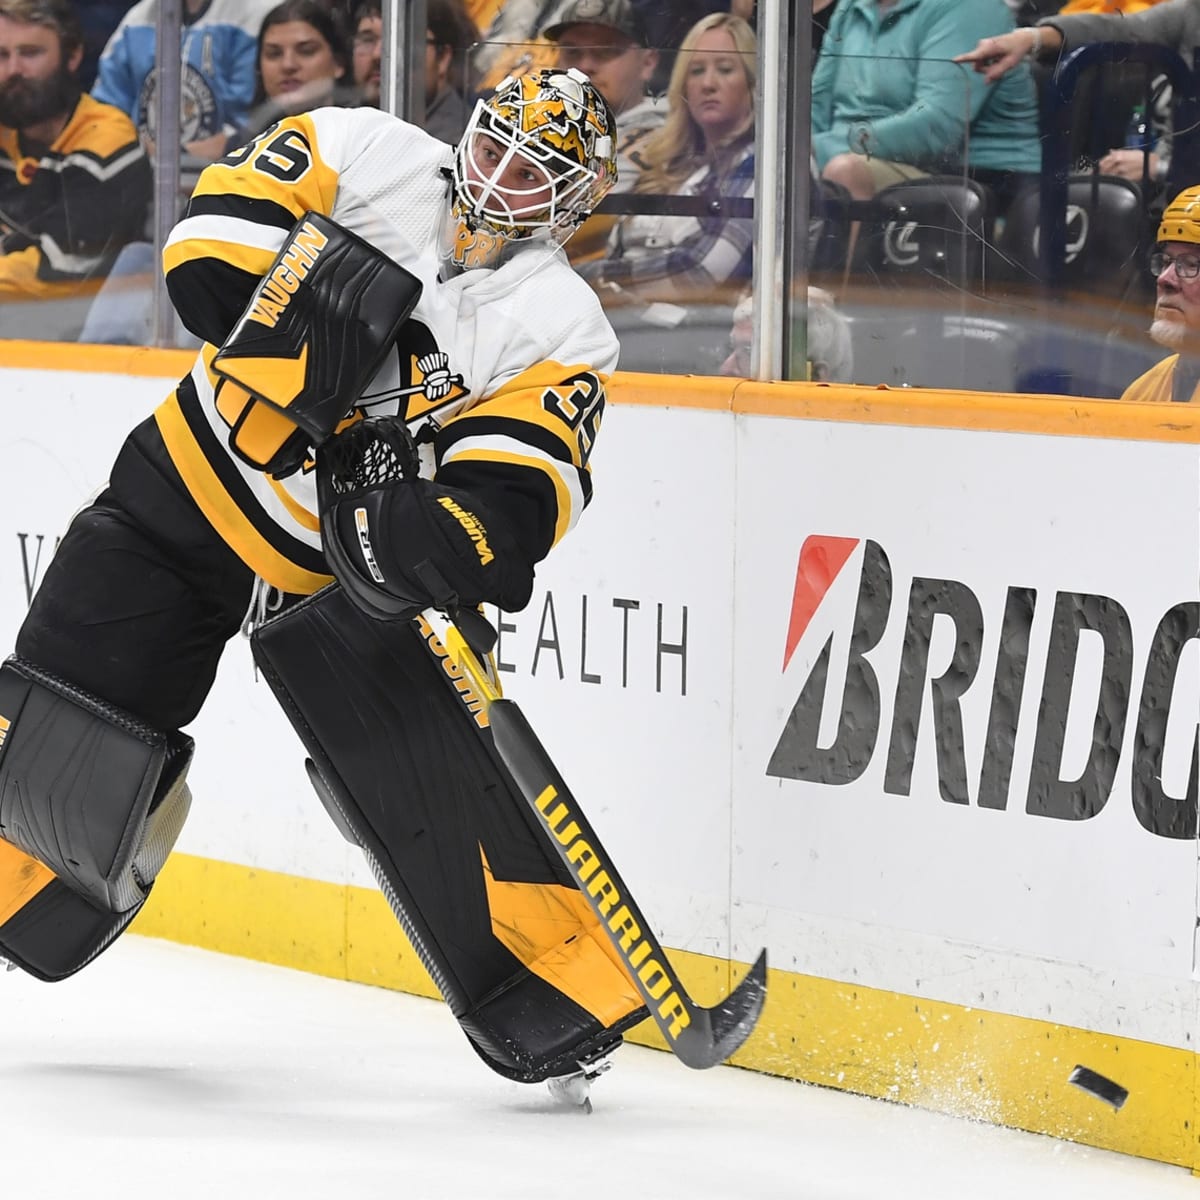 Tristan Jarry will get the start - Pittsburgh Penguins